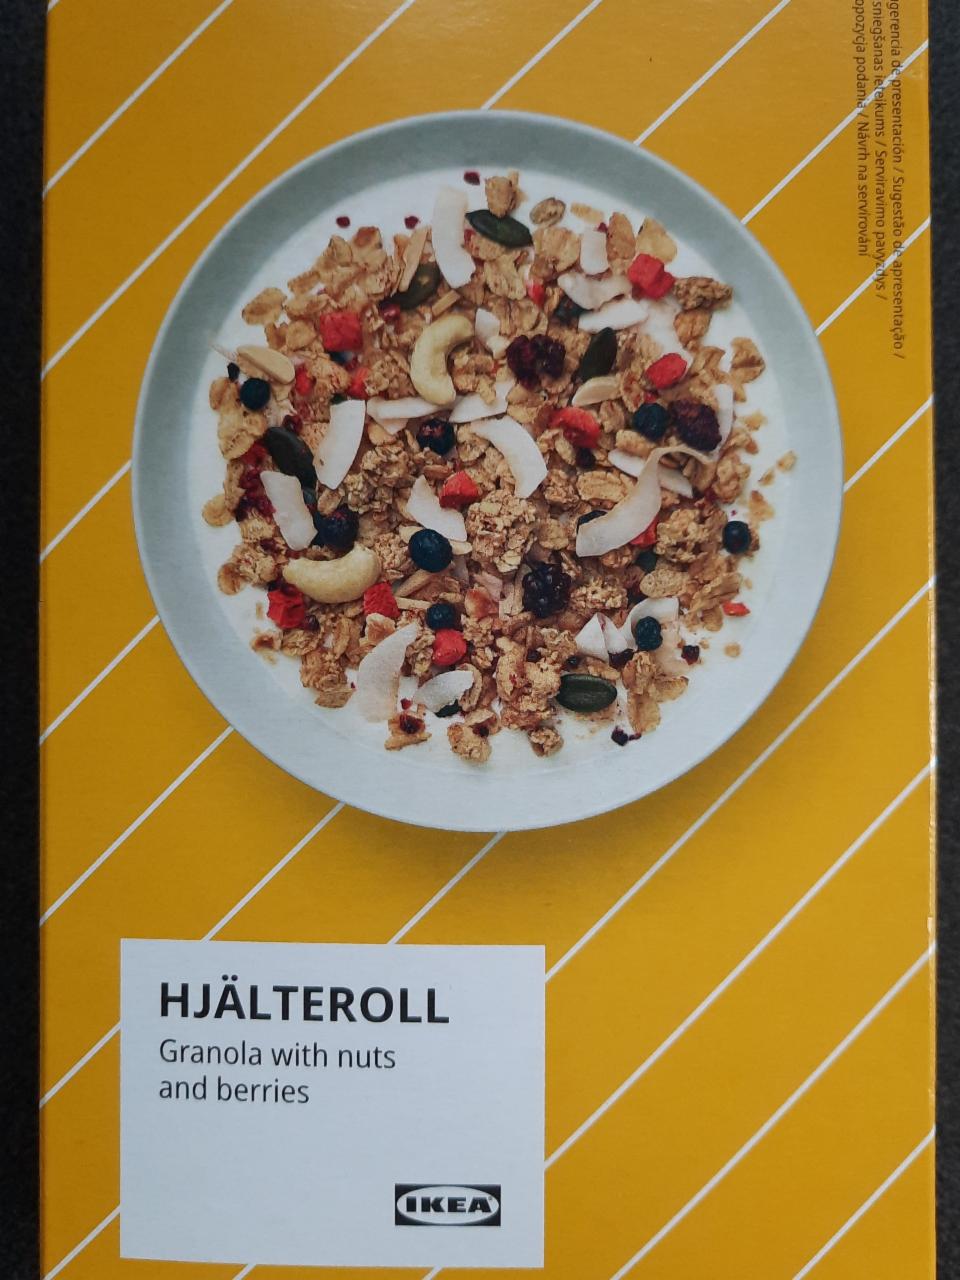 Fotografie - Hjälteroll Granola with nuts and berries Ikea